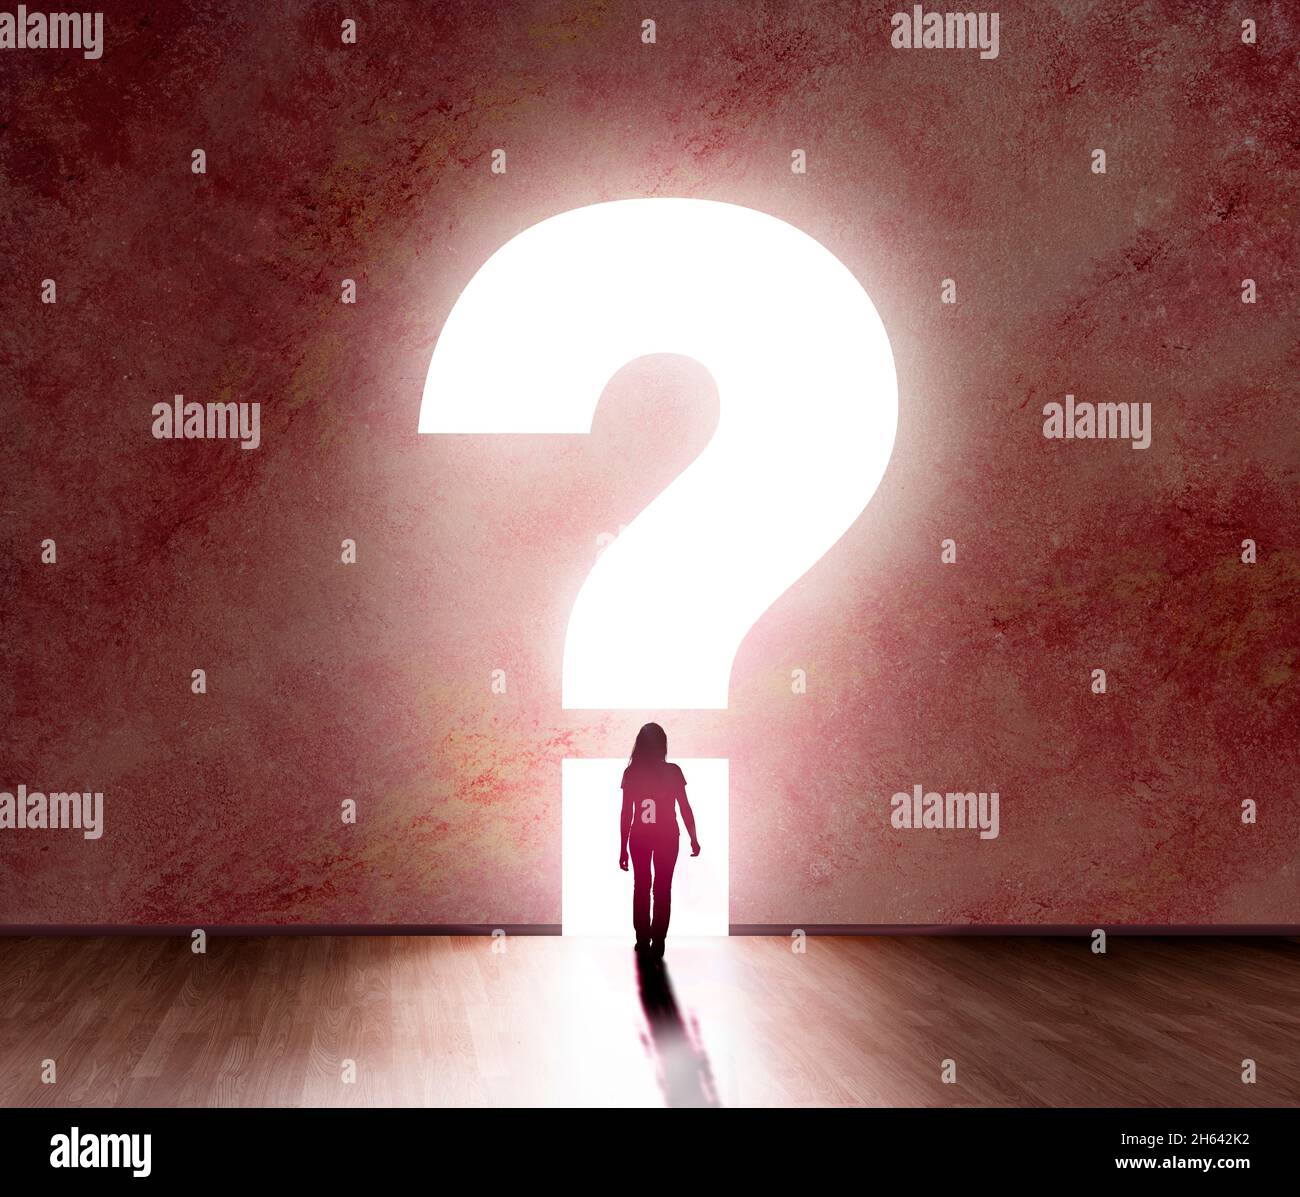 silhouette of a female person in front of a question mark Stock Photo